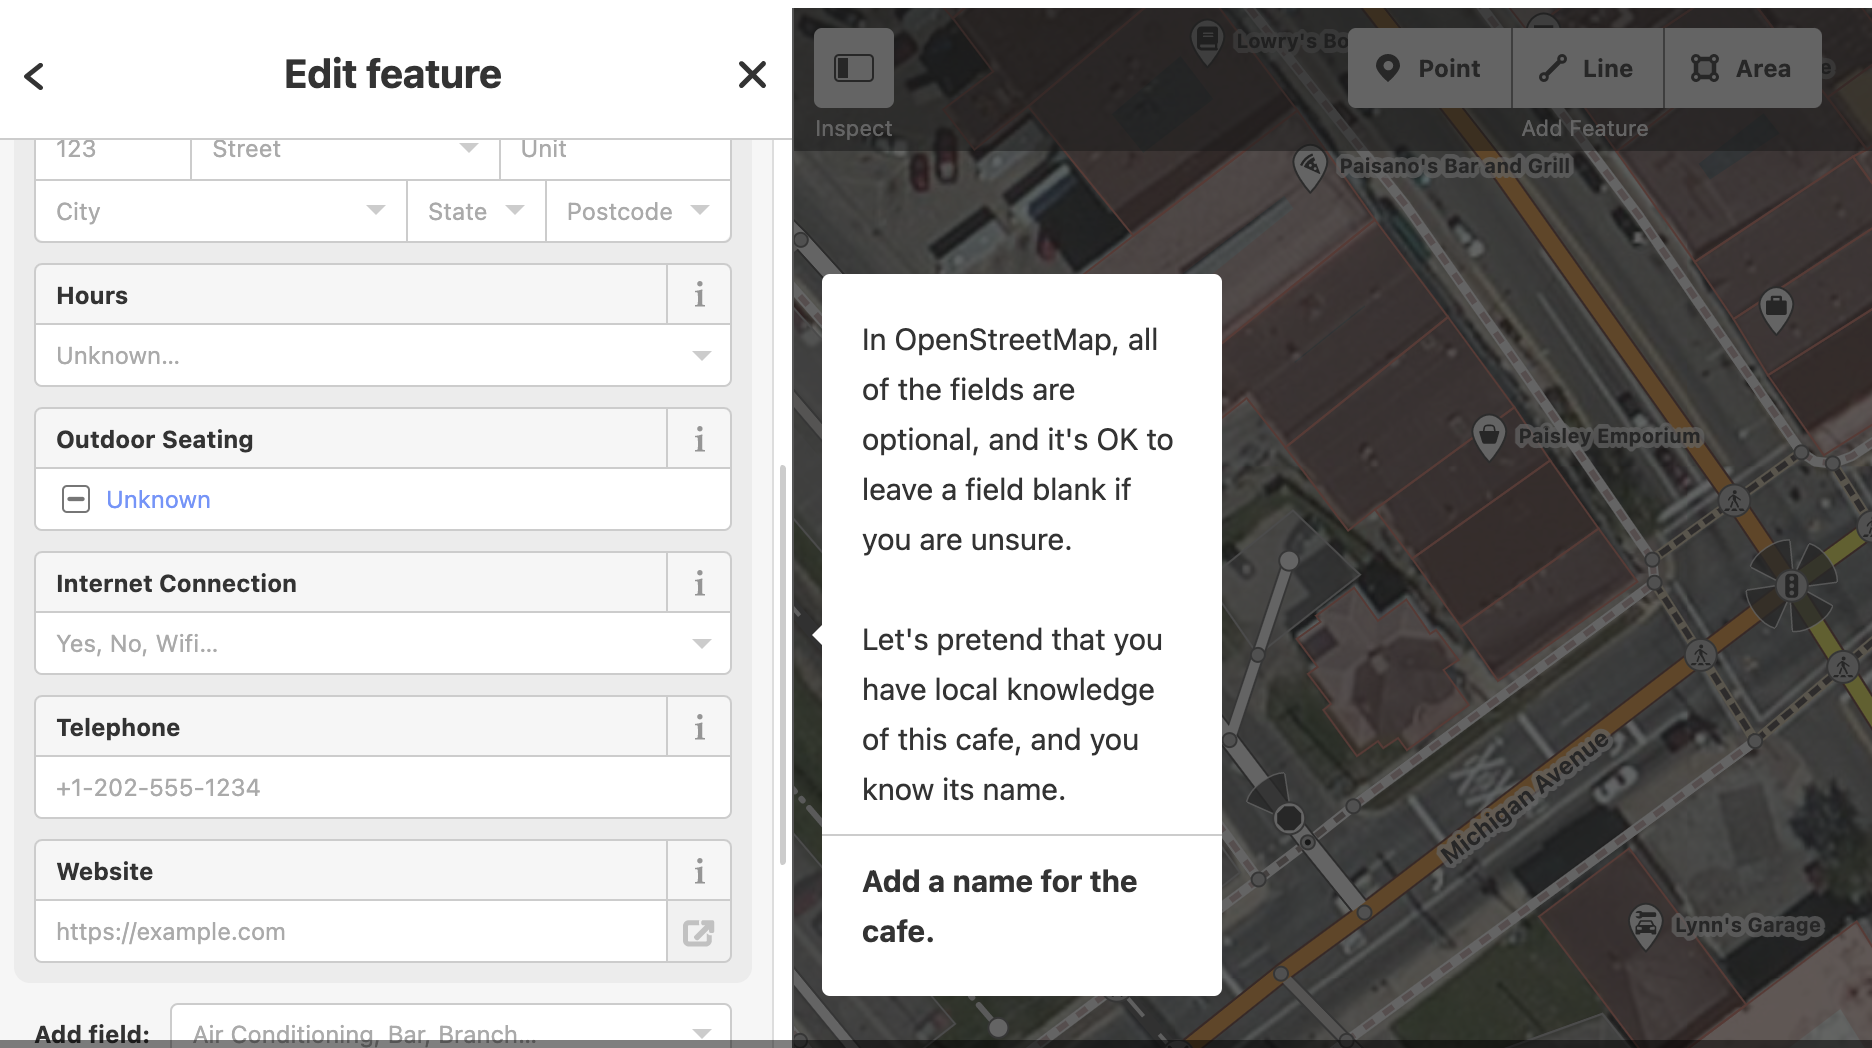 OpenStreetMap editor showing a map interface and a menu with text entry boxes